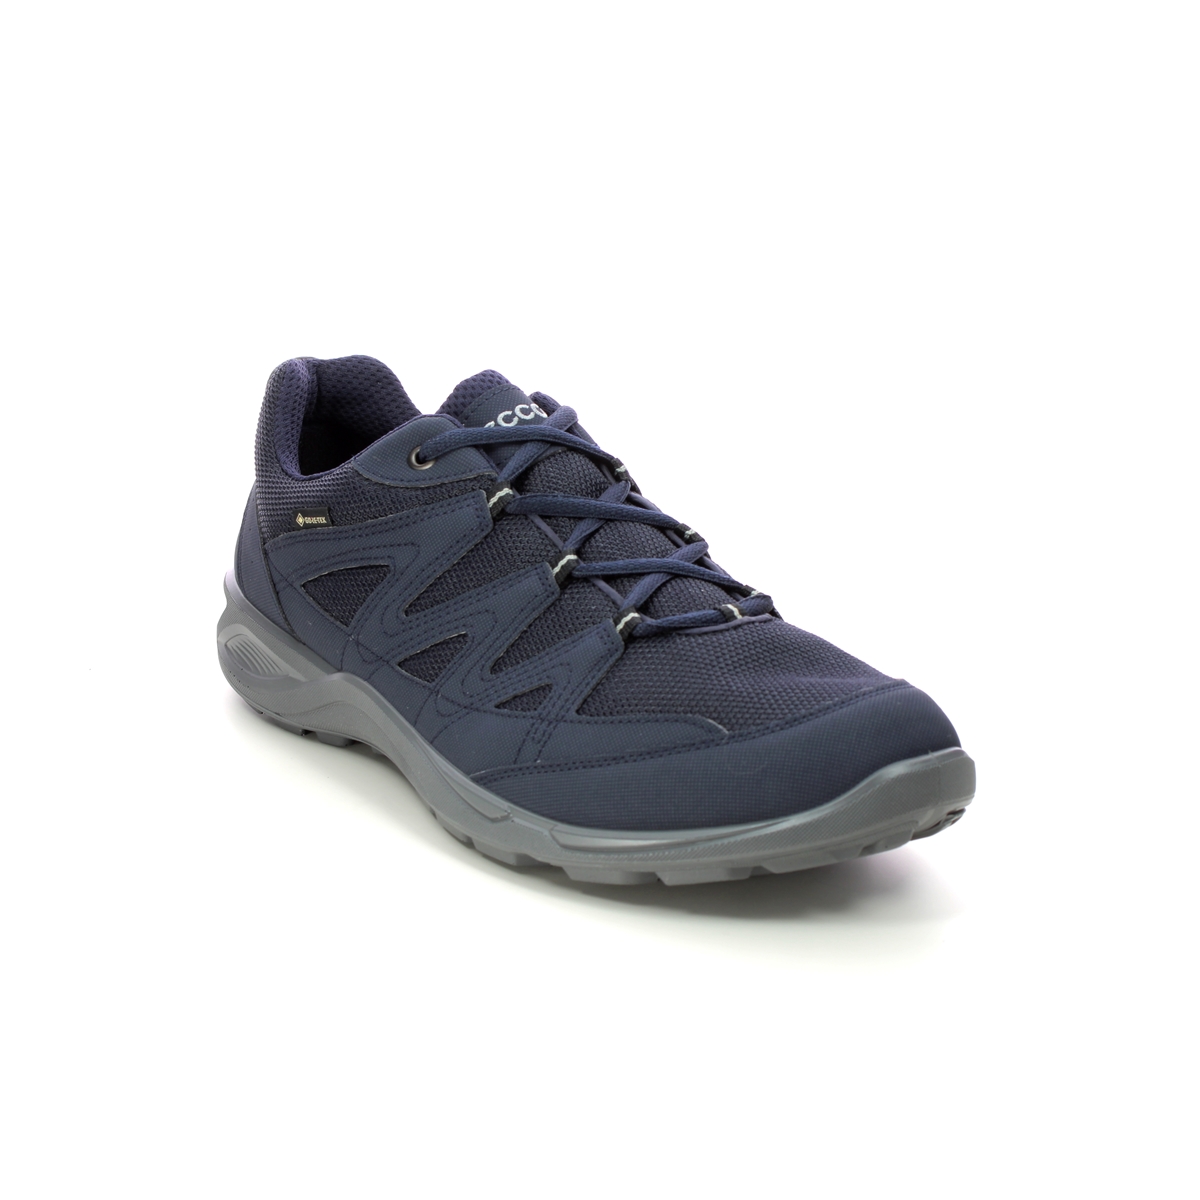 Ecco Terracruise Light Gtx Mens Navy Mens Trainers 825784-50769 In Size 42 In Plain Navy